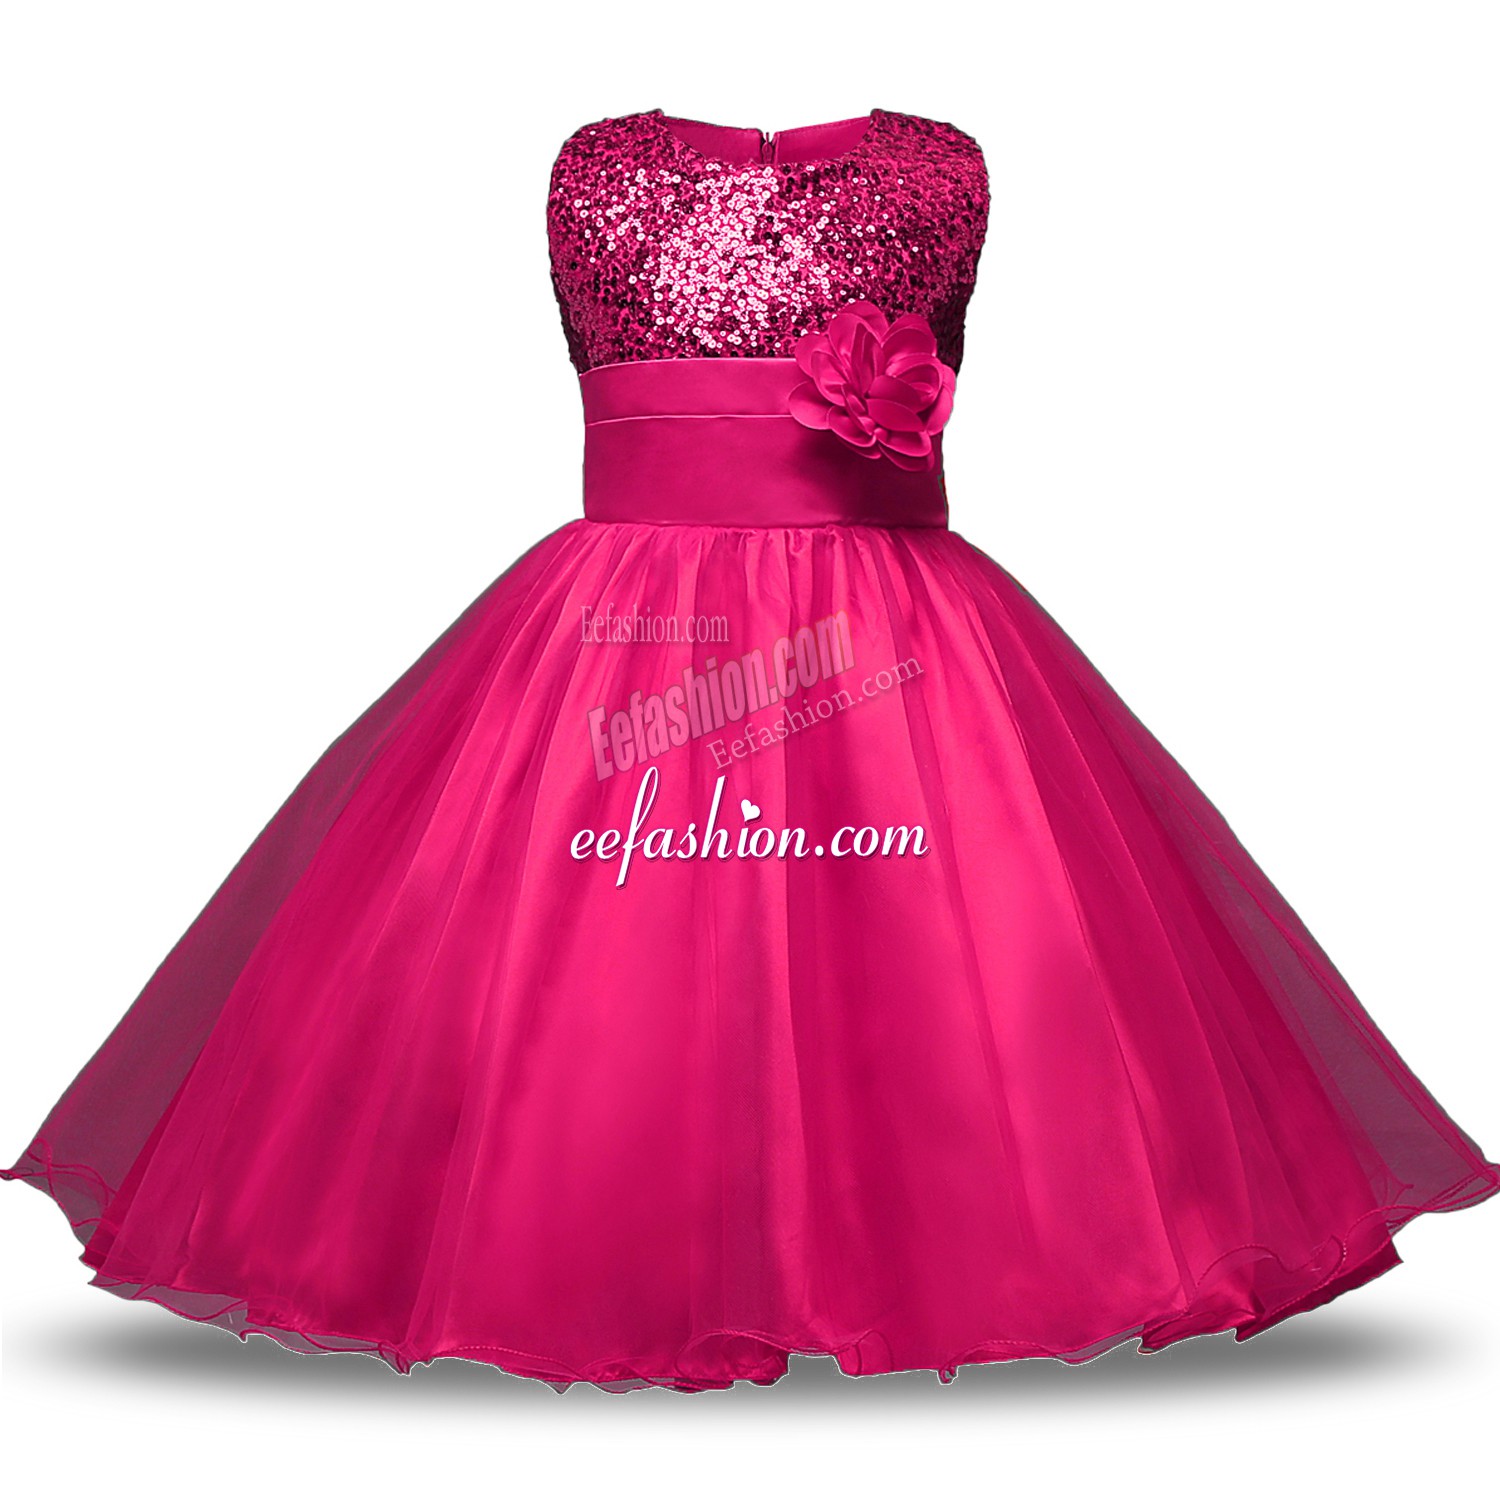  Sleeveless Organza and Sequined Knee Length Zipper Flower Girl Dresses for Less in Hot Pink with Belt and Hand Made Flower